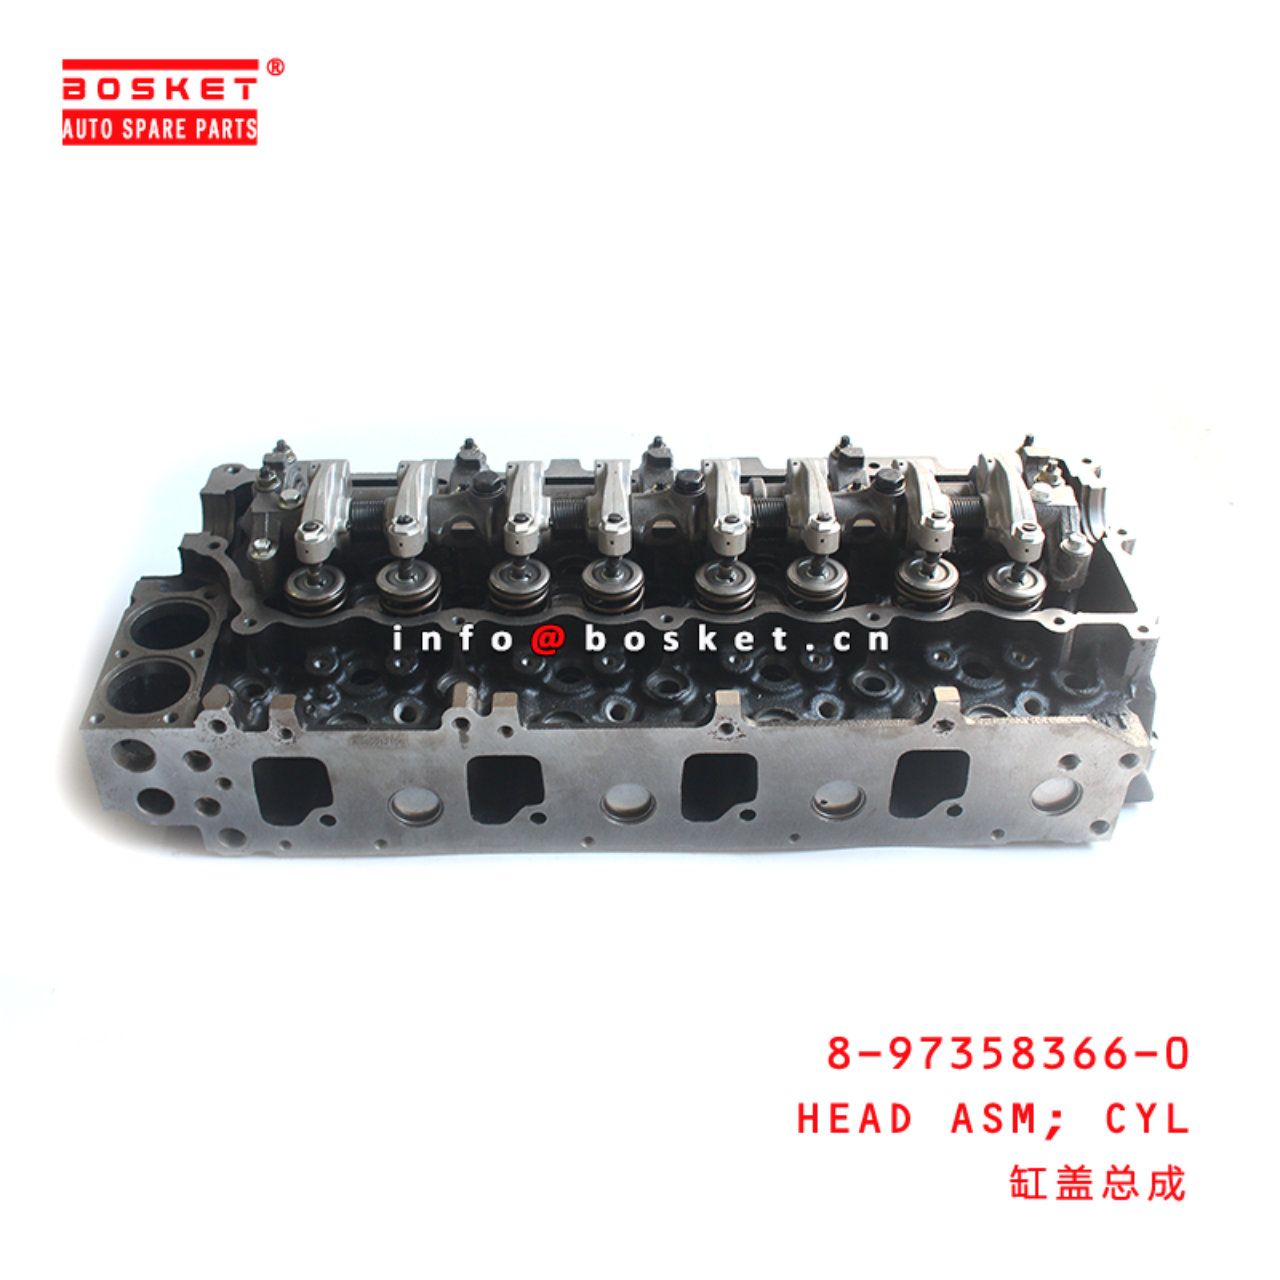 8-97358366-0 Cylinder Head Assembly Suitable for ISUZU NPR 4HE1 